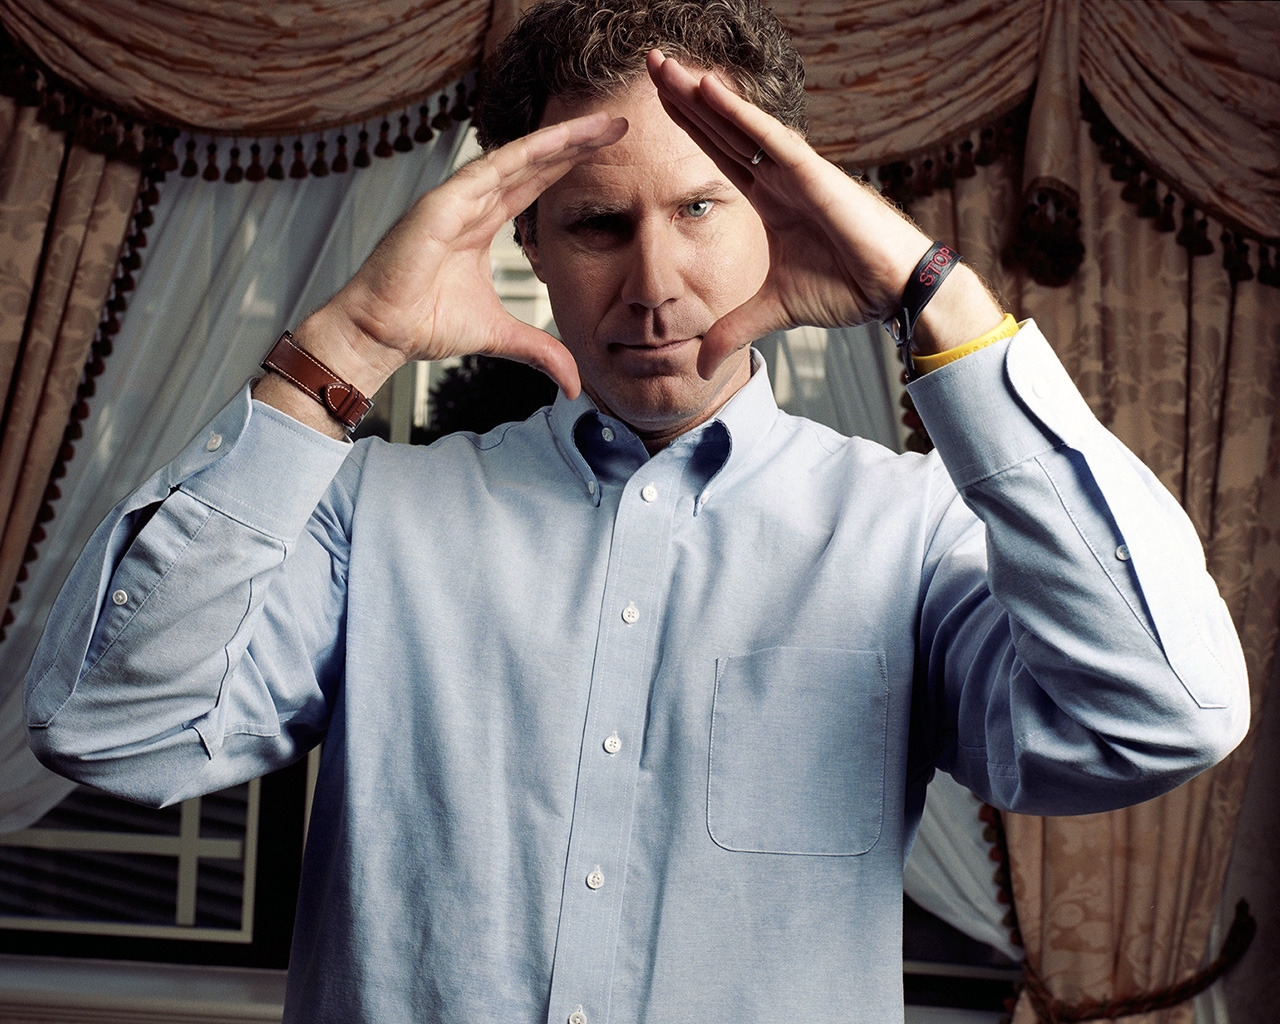 Will Ferrell for 1280 x 1024 resolution